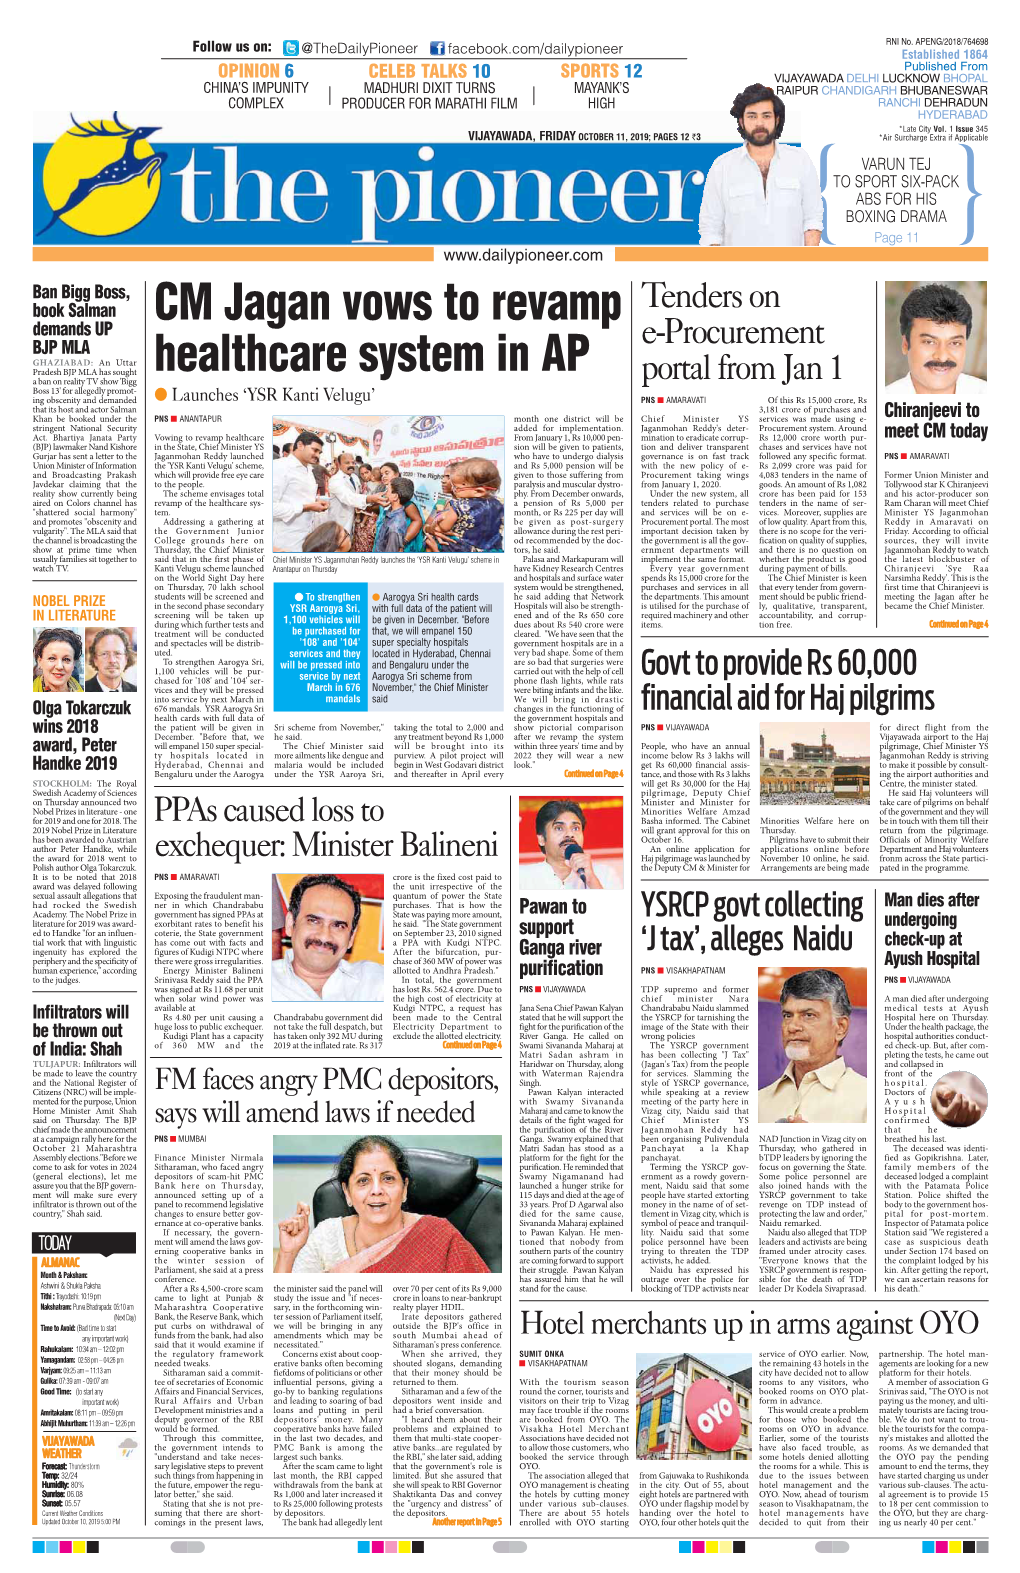 CM Jagan Vows to Revamp Healthcare System in AP